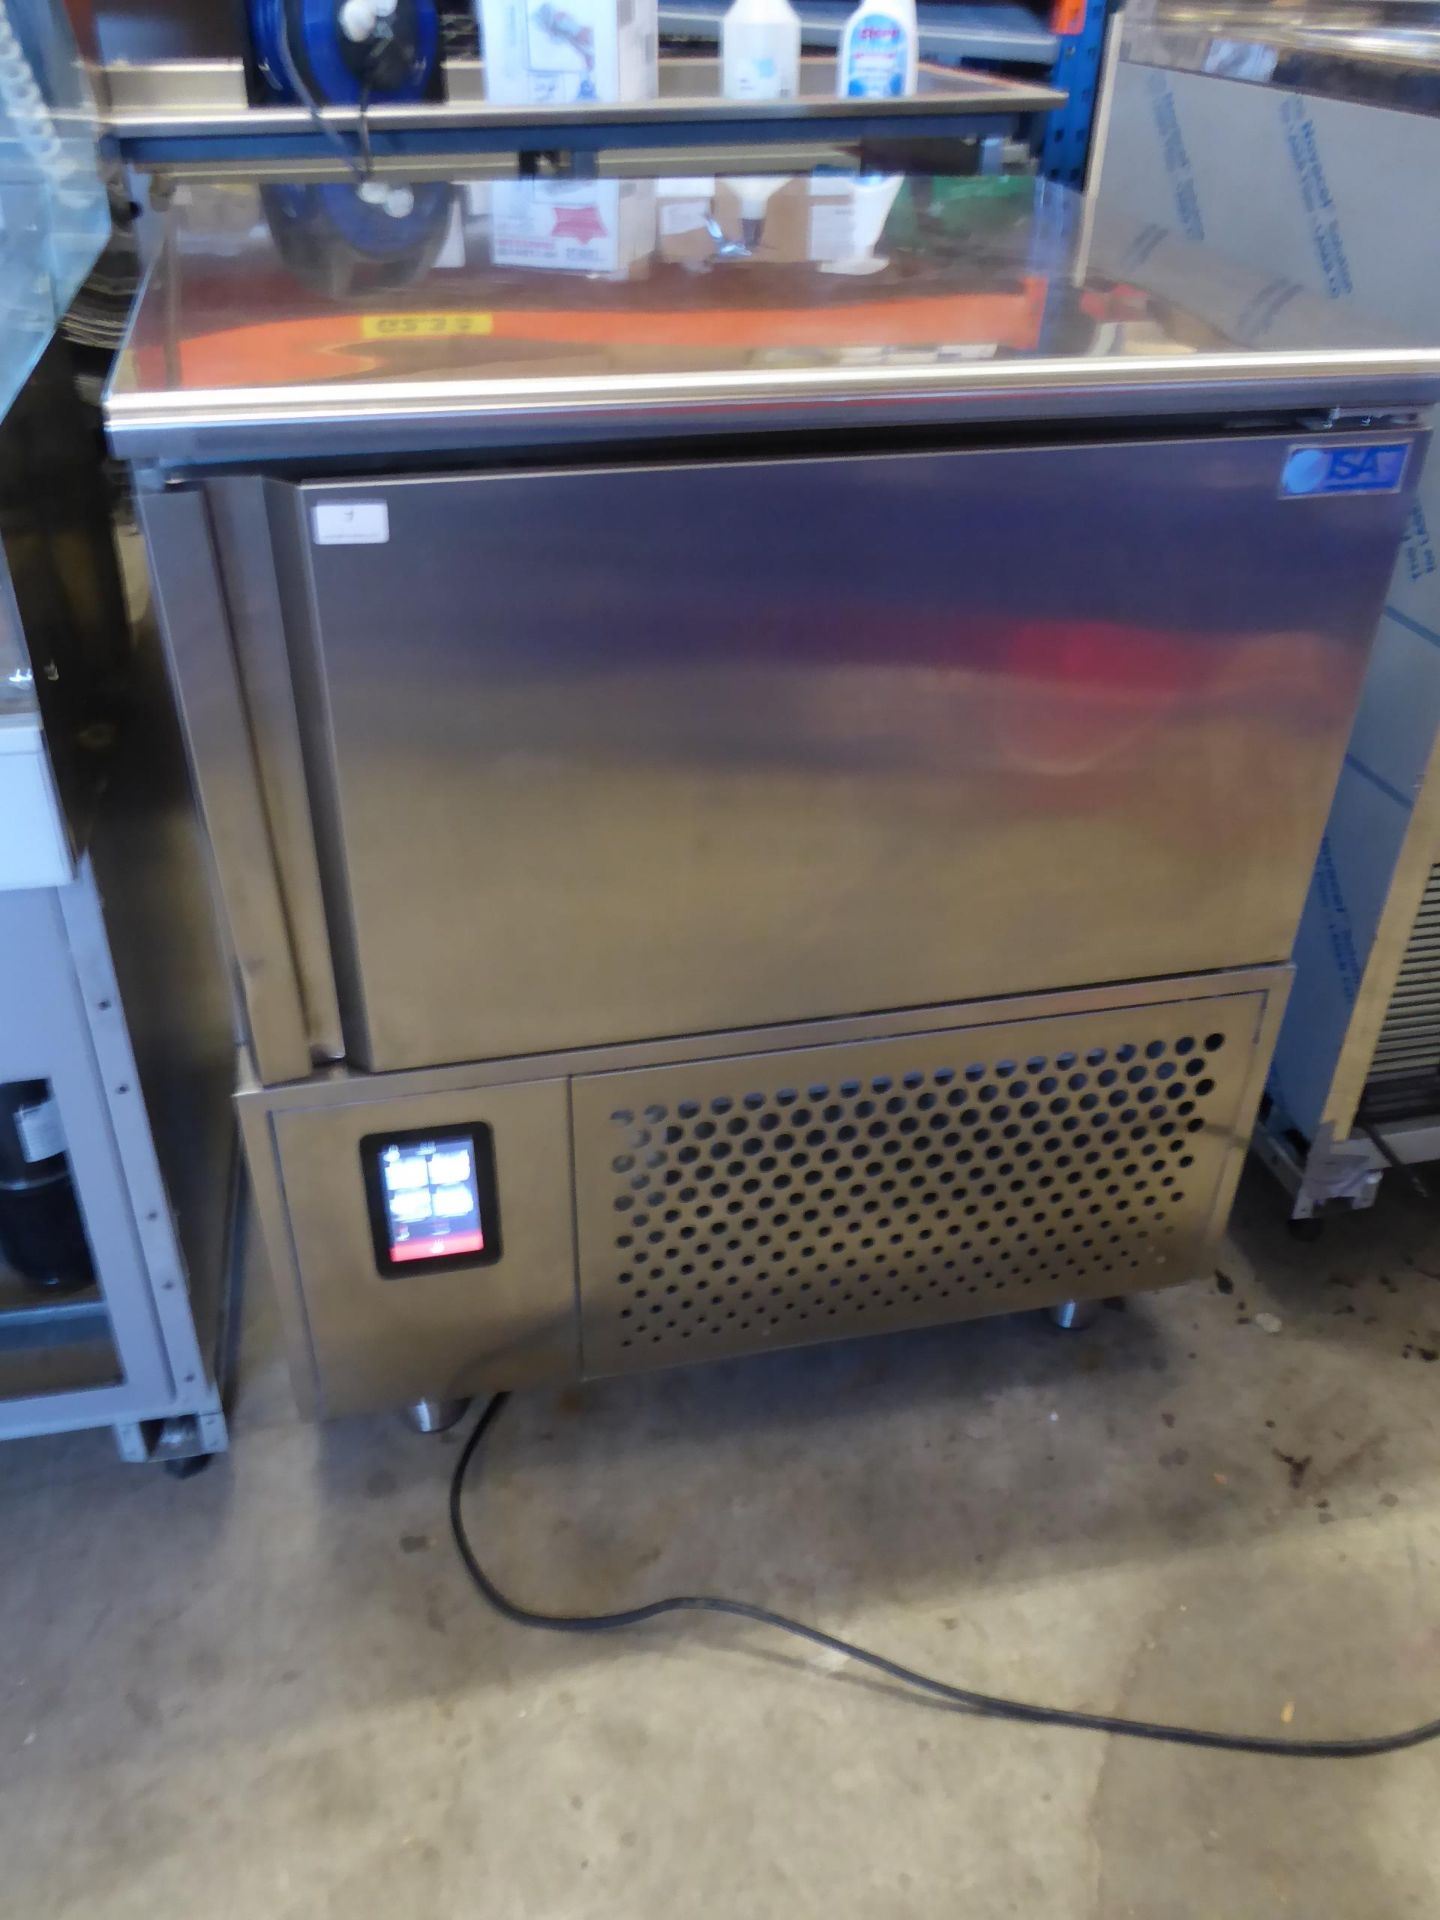 * ISA Zero Touch T5 - multifunctional blast chiller and shock freezer. Purchace price £5,000